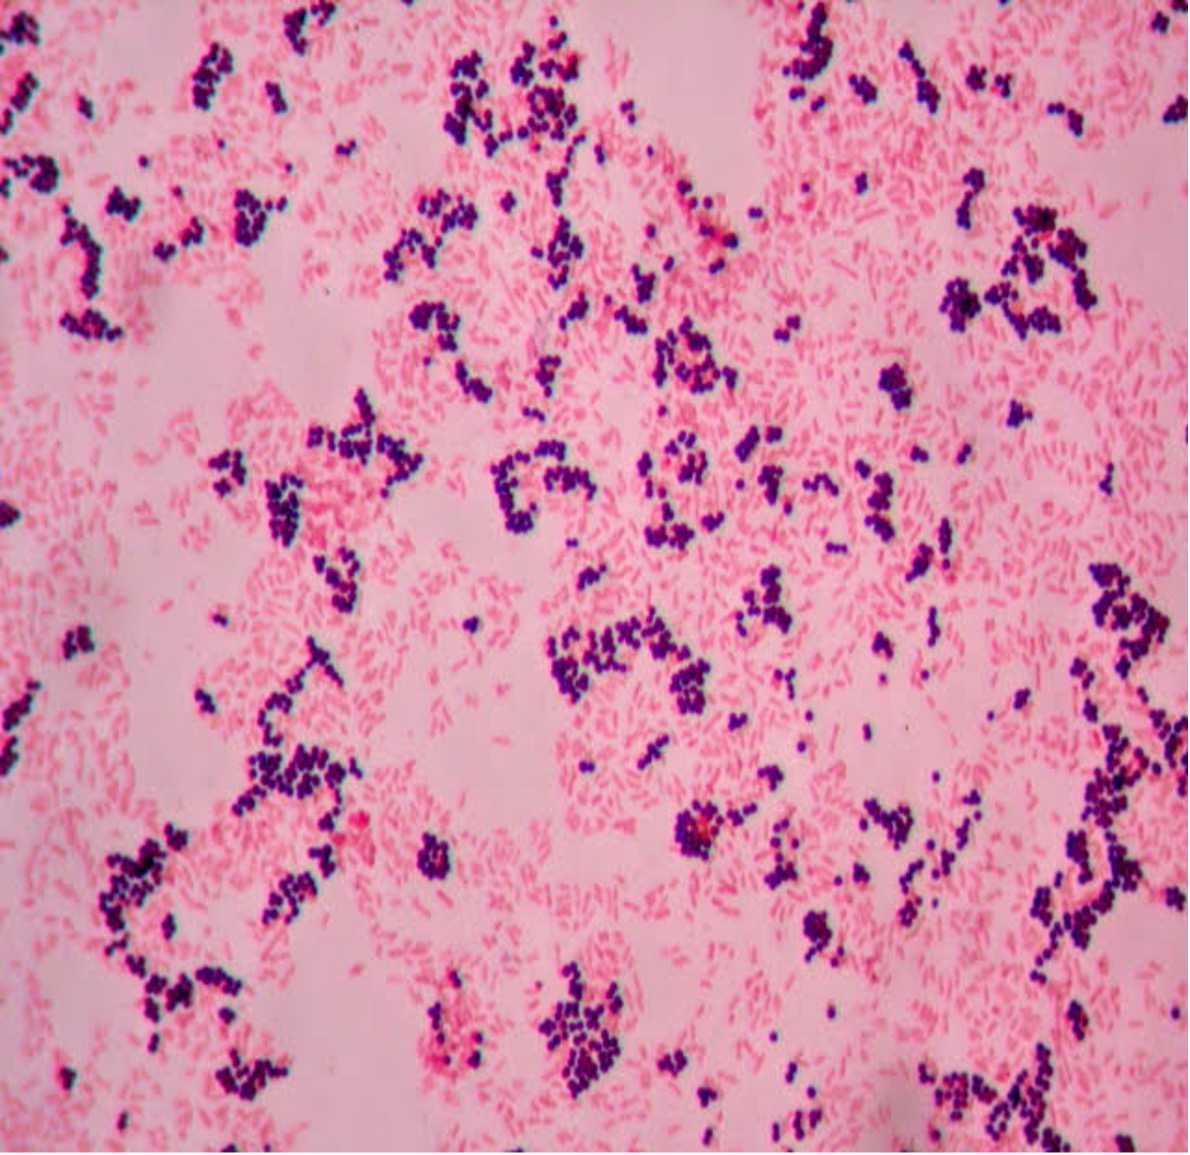 purple round cells mixed with pink rod cells